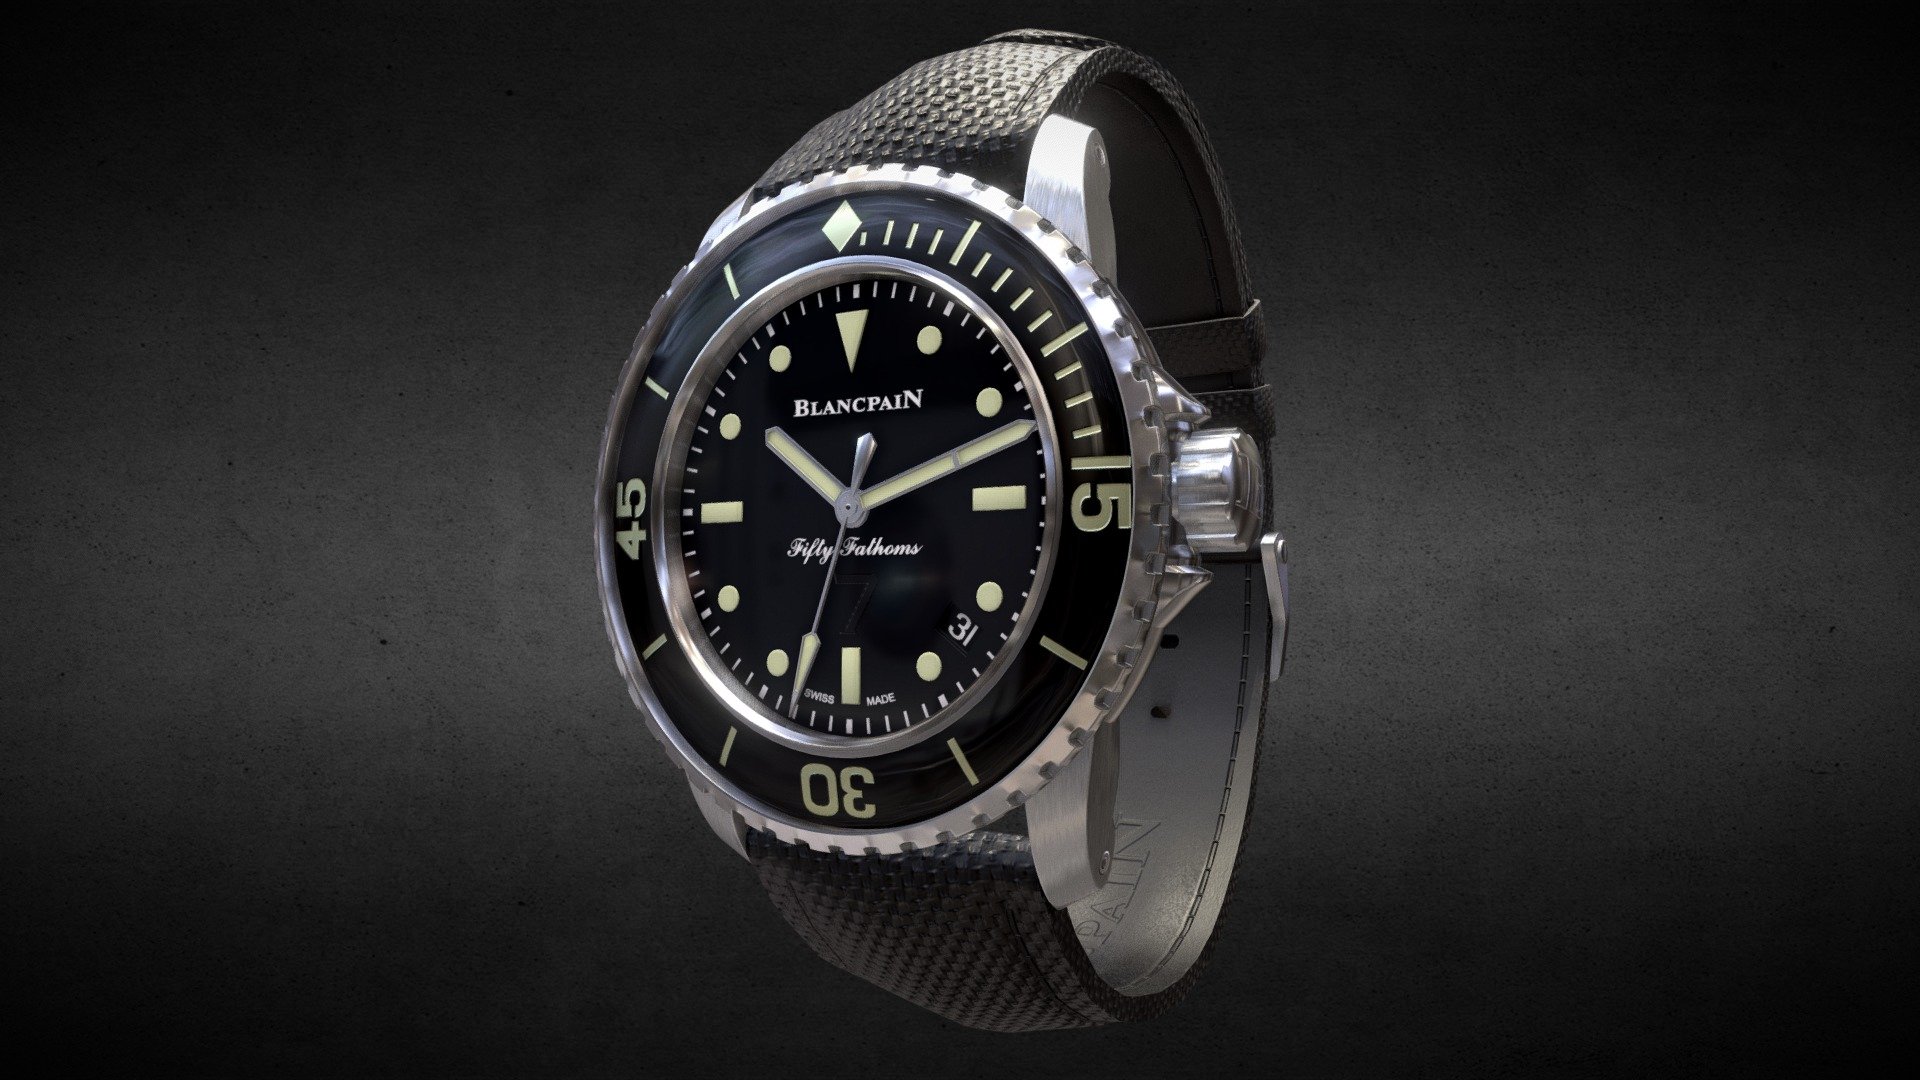 Awesome stainless steel Blancpain Fifty Fathoms Watch․
Use for Unreal Engine 4 and Unity3D. Try in augmented reality in the AR-Watches app. 
Links to the app: Android, iOS

Currently available for download in FBX format.

3D model developed by AR-Watches

Disclaimer: We do not own the design of the watch, we only made the 3D model 3d model